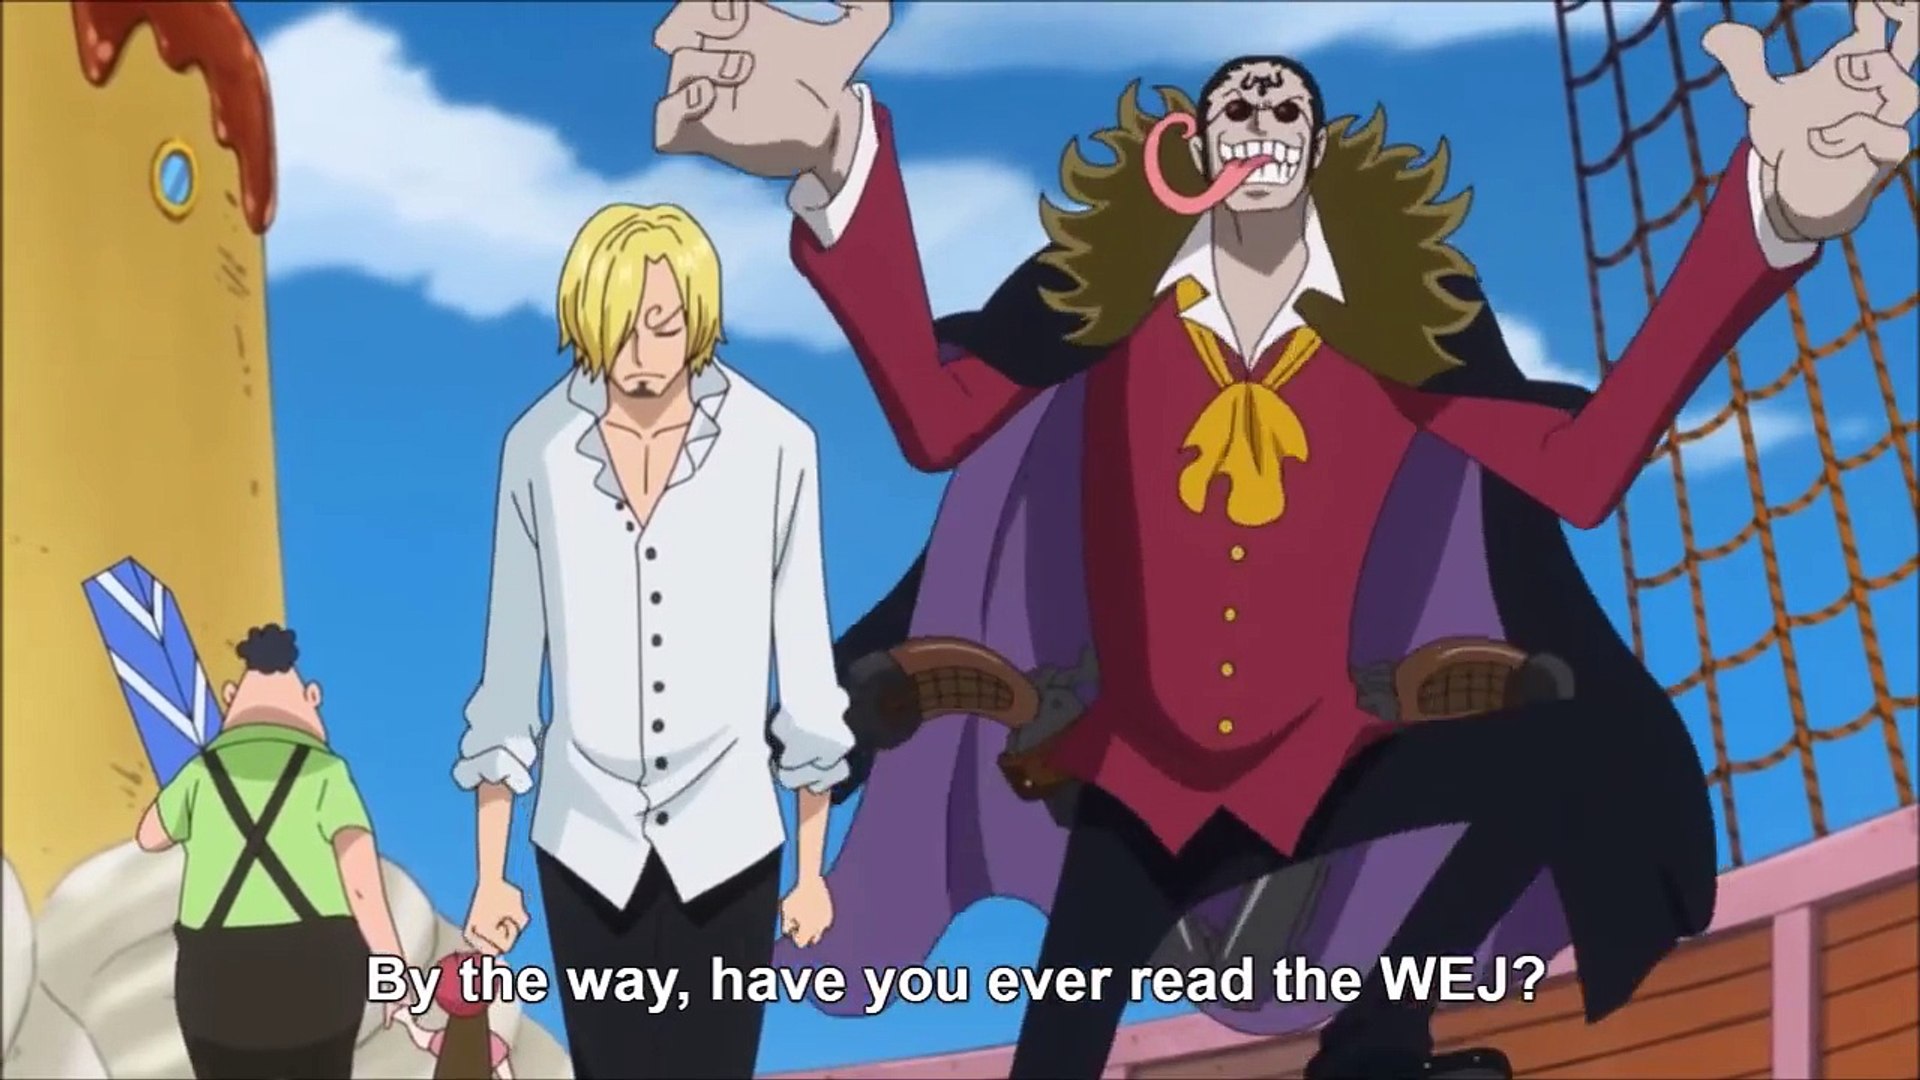 Germa 66 Vs Sora Sky Warrior We Times Comic One Piece Hd Ep 7 Subbed Video Dailymotion